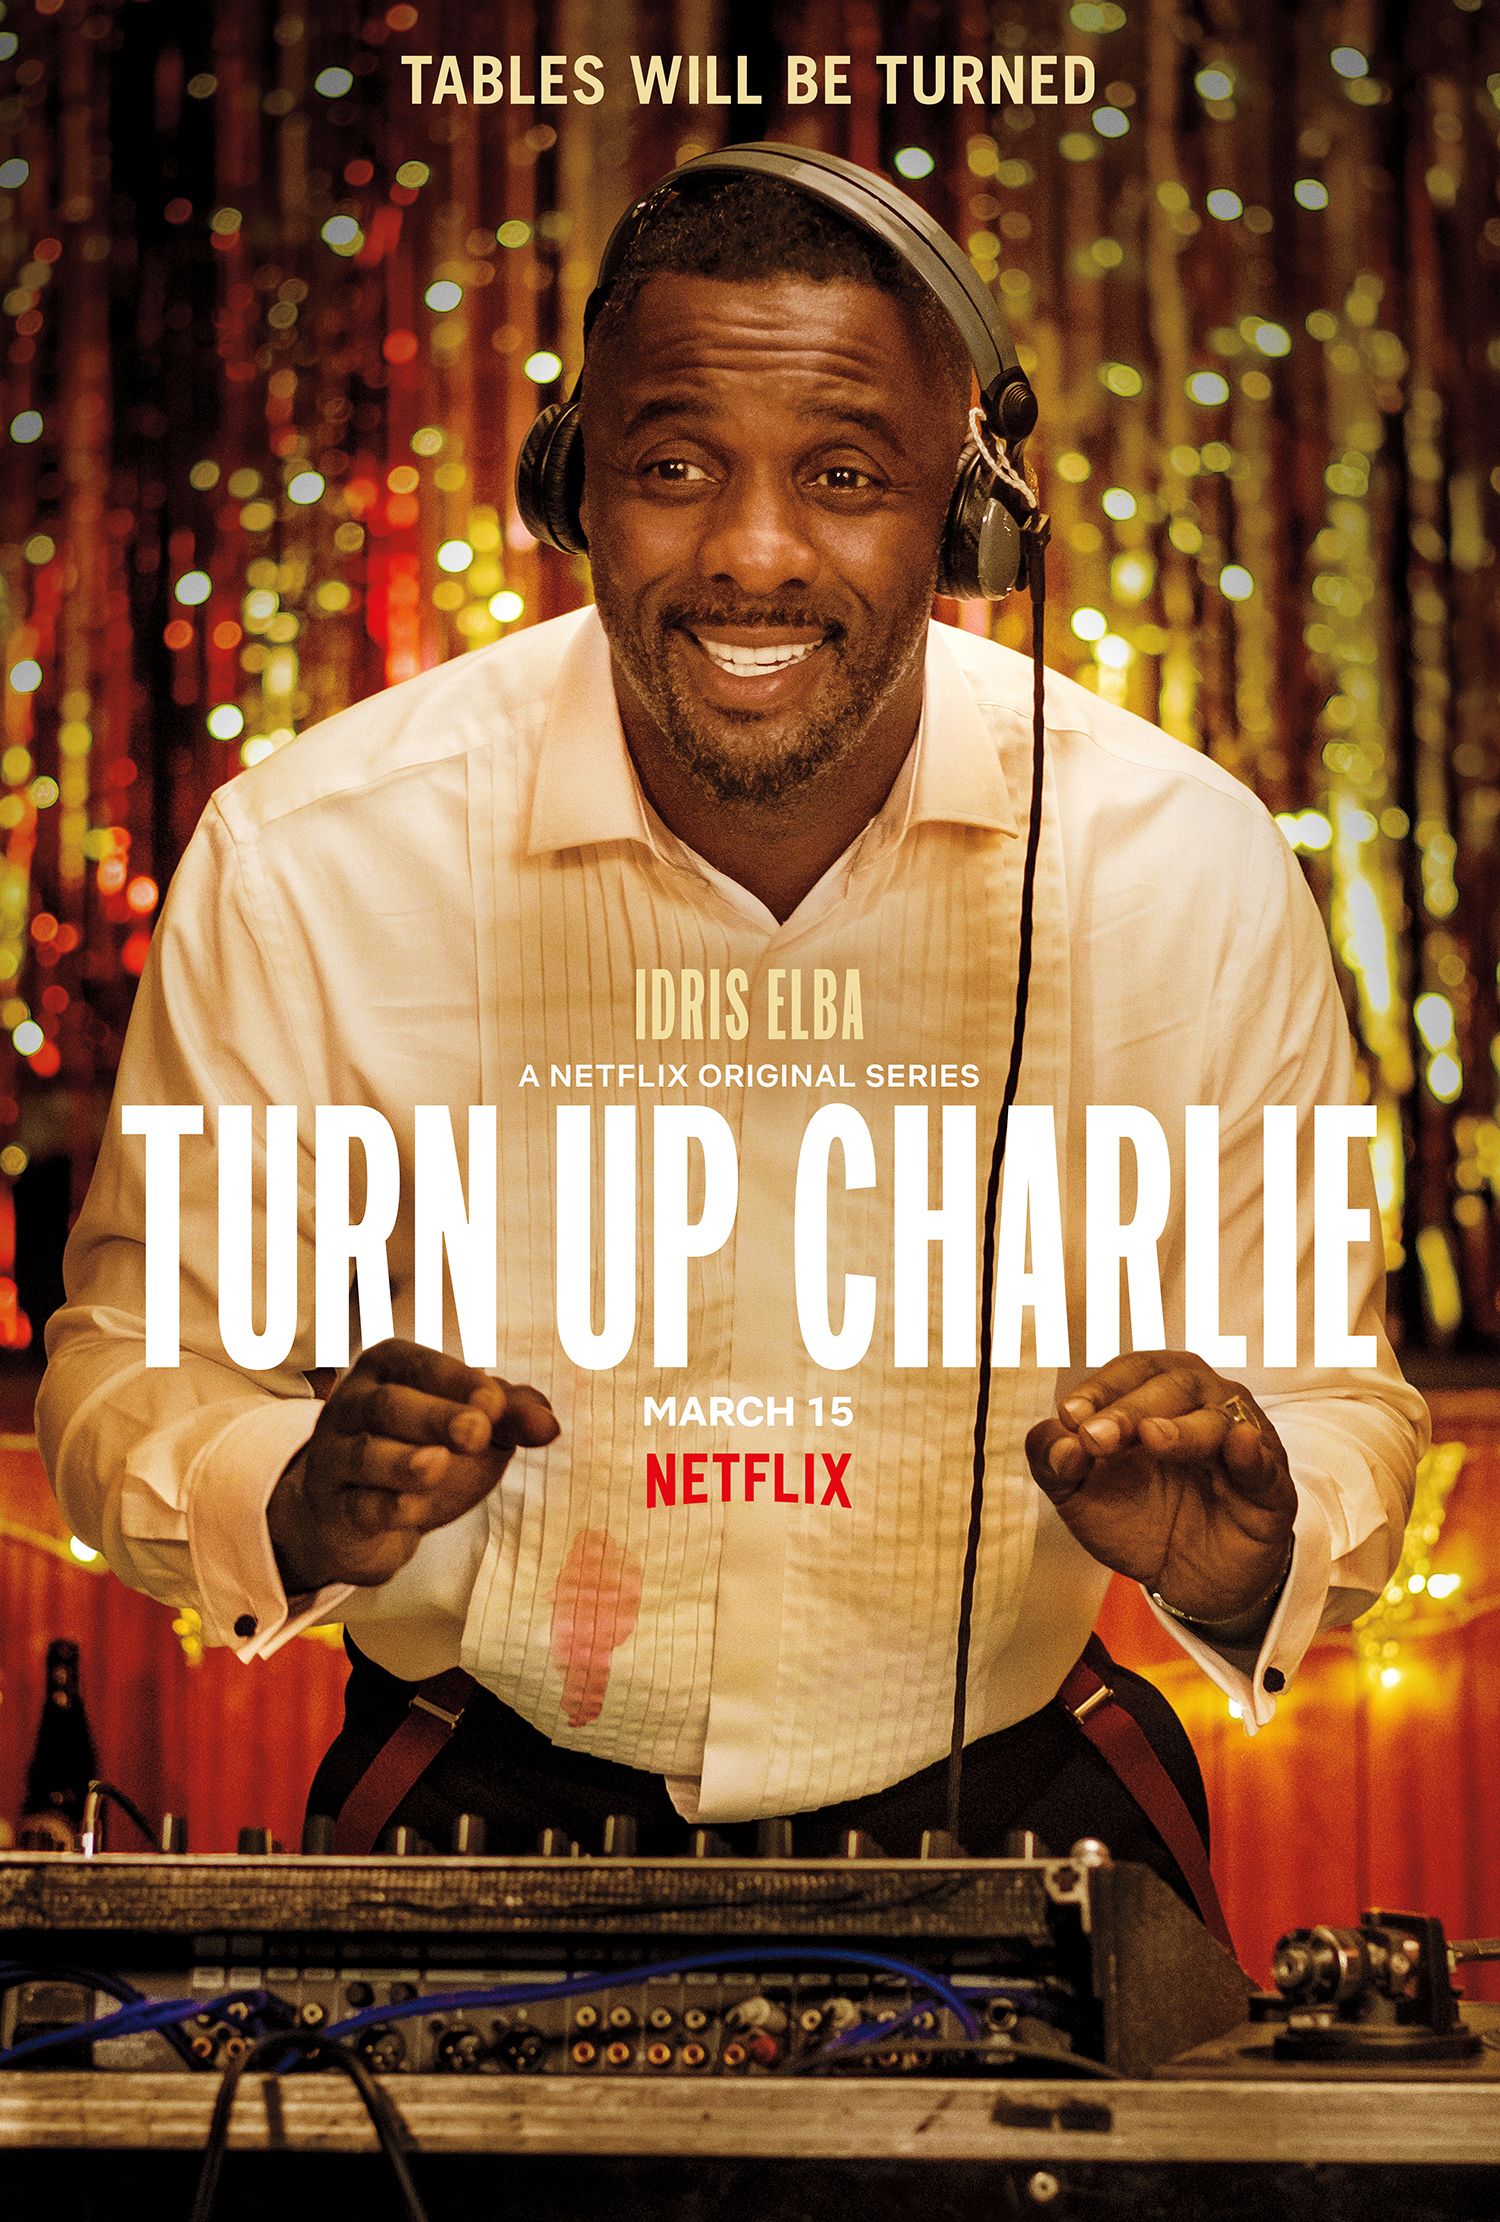 Idris Elba on Turn Up Charlie and Wanting to Do More Comedy | Collider